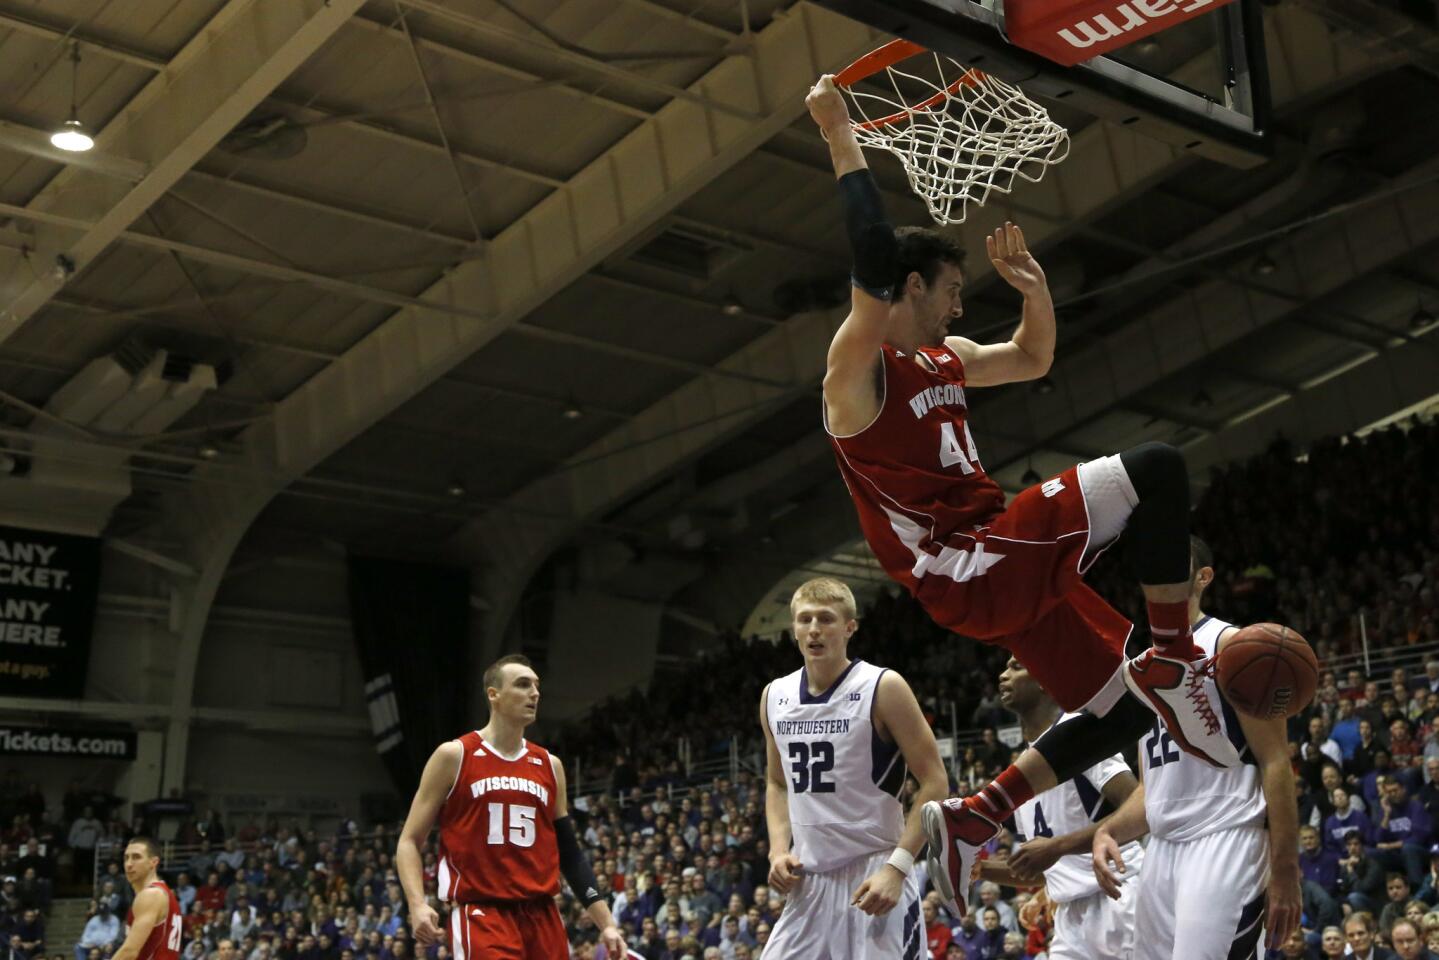 Wisconsin forward Frank Kaminsky with a dunk in the second half.